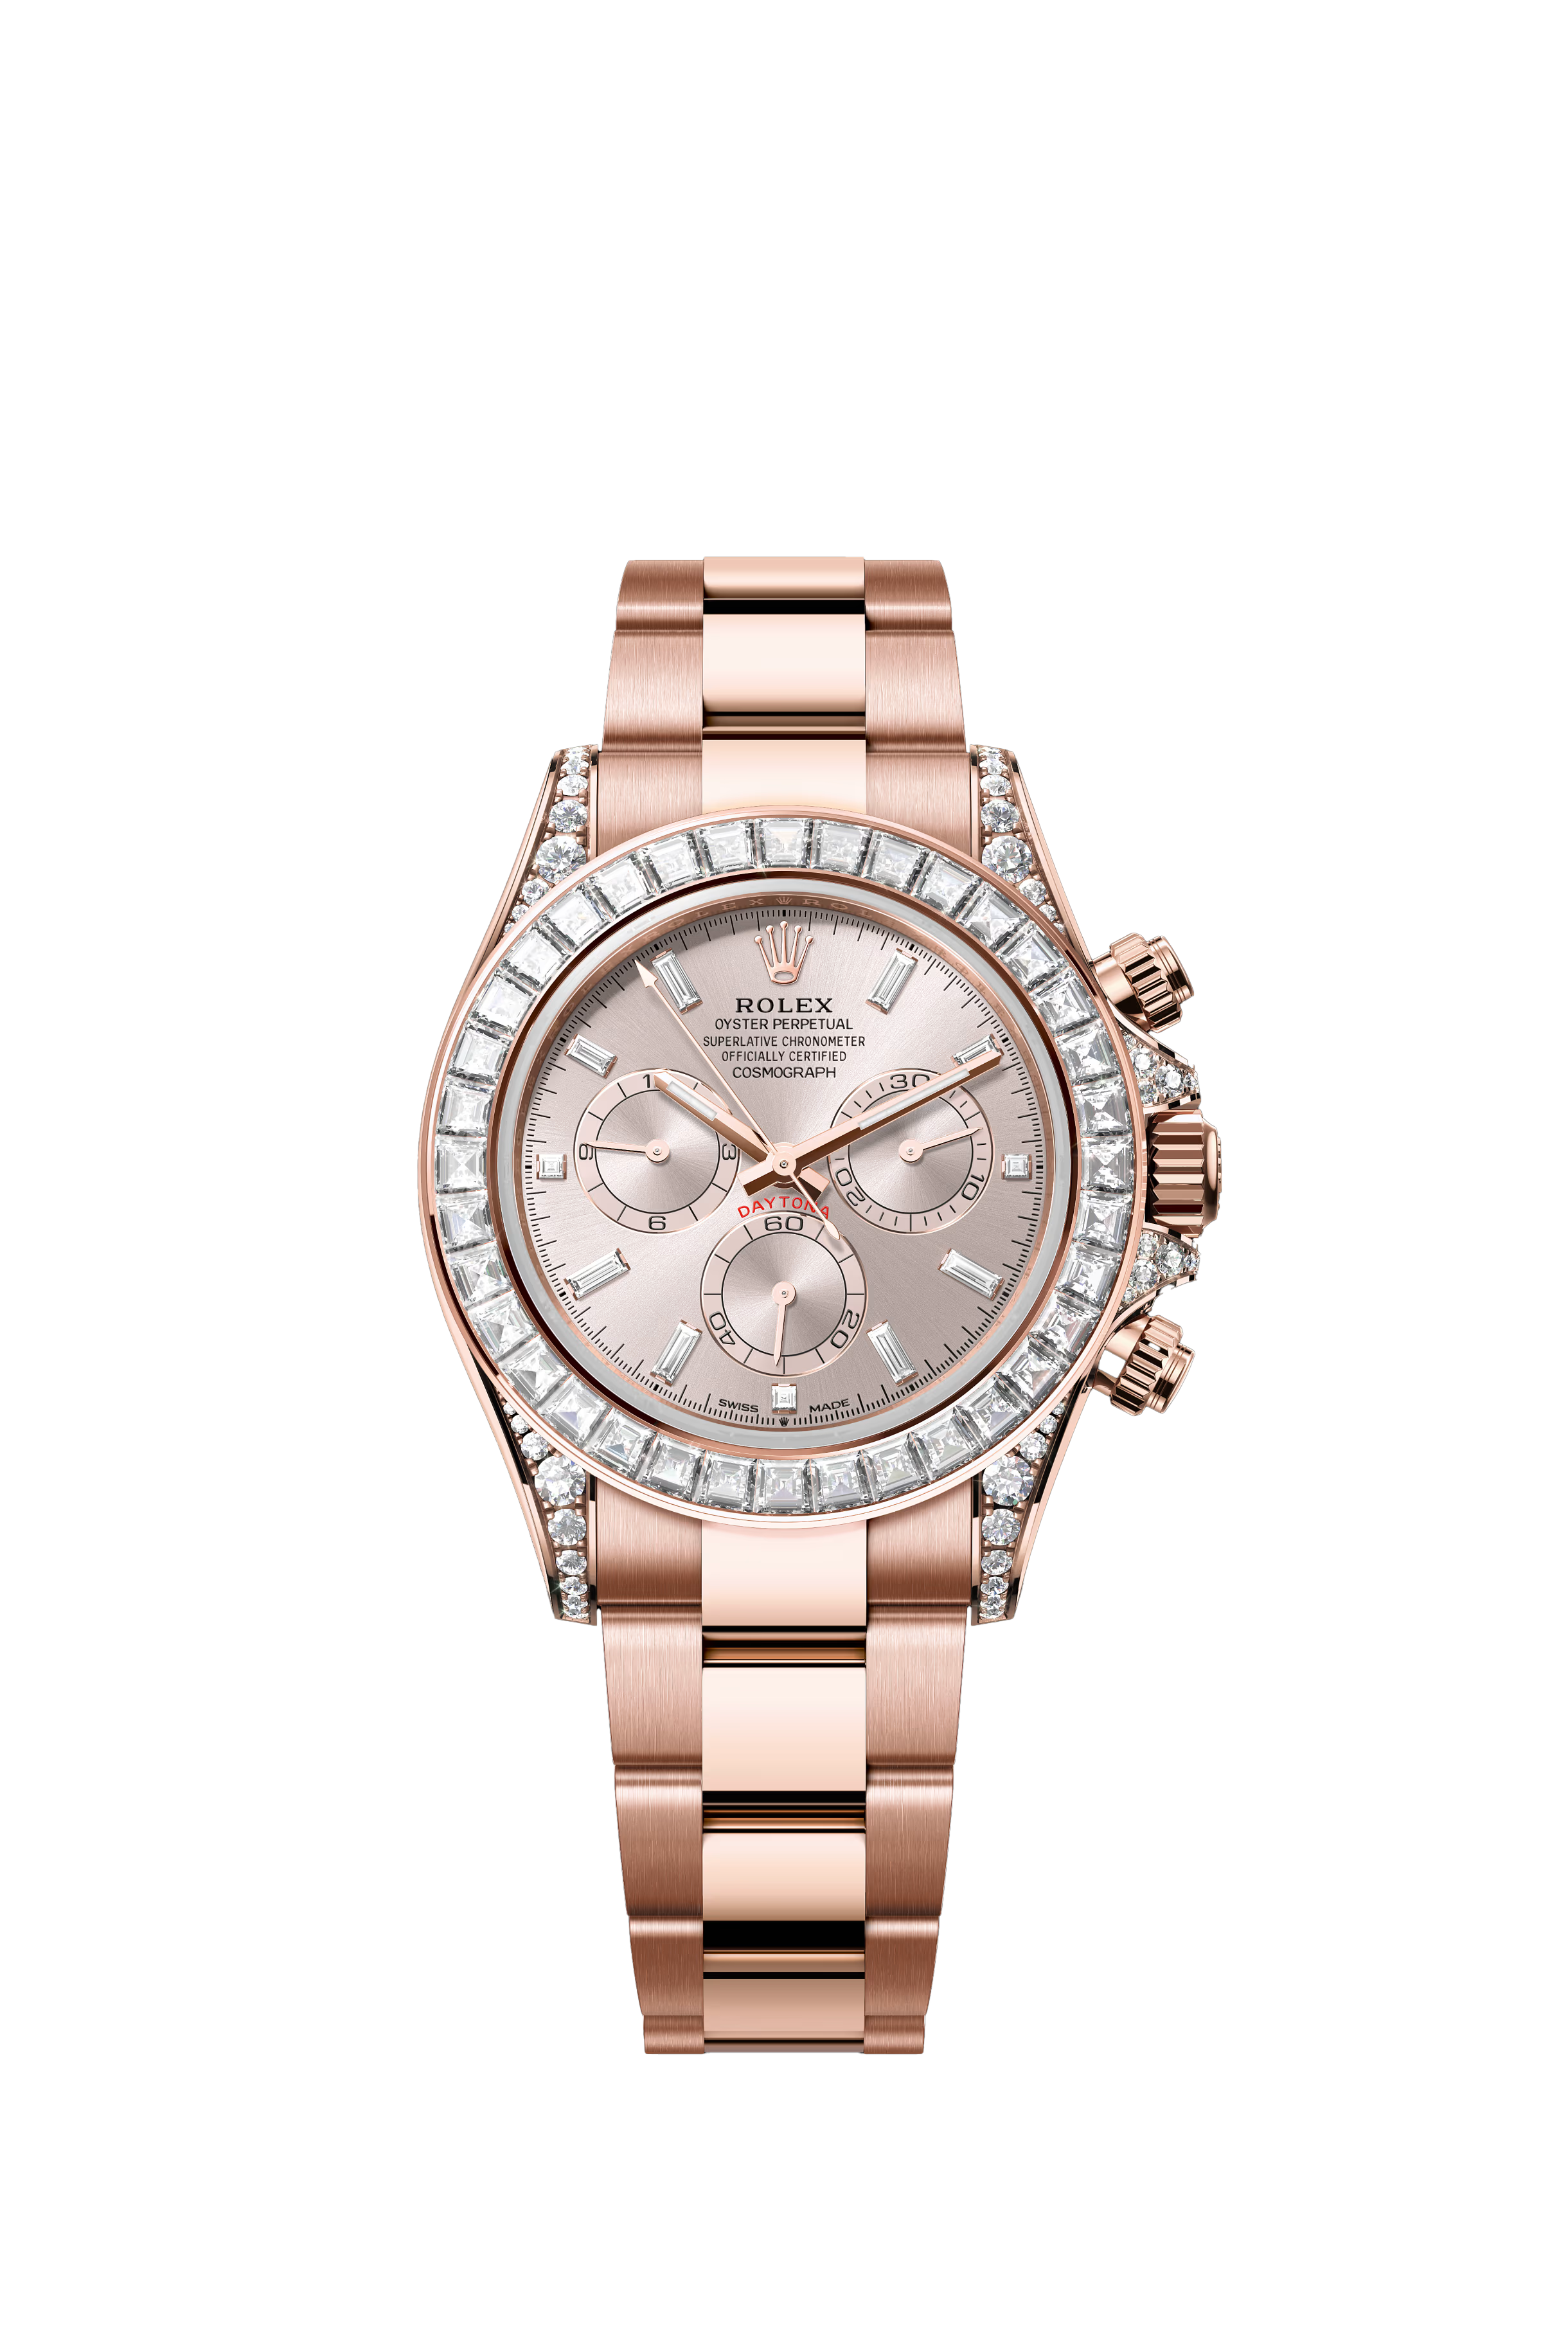 Rolex Cosmograph Daytona Oyster, 40 mm, Everose gold and diamonds Reference 126595TBR